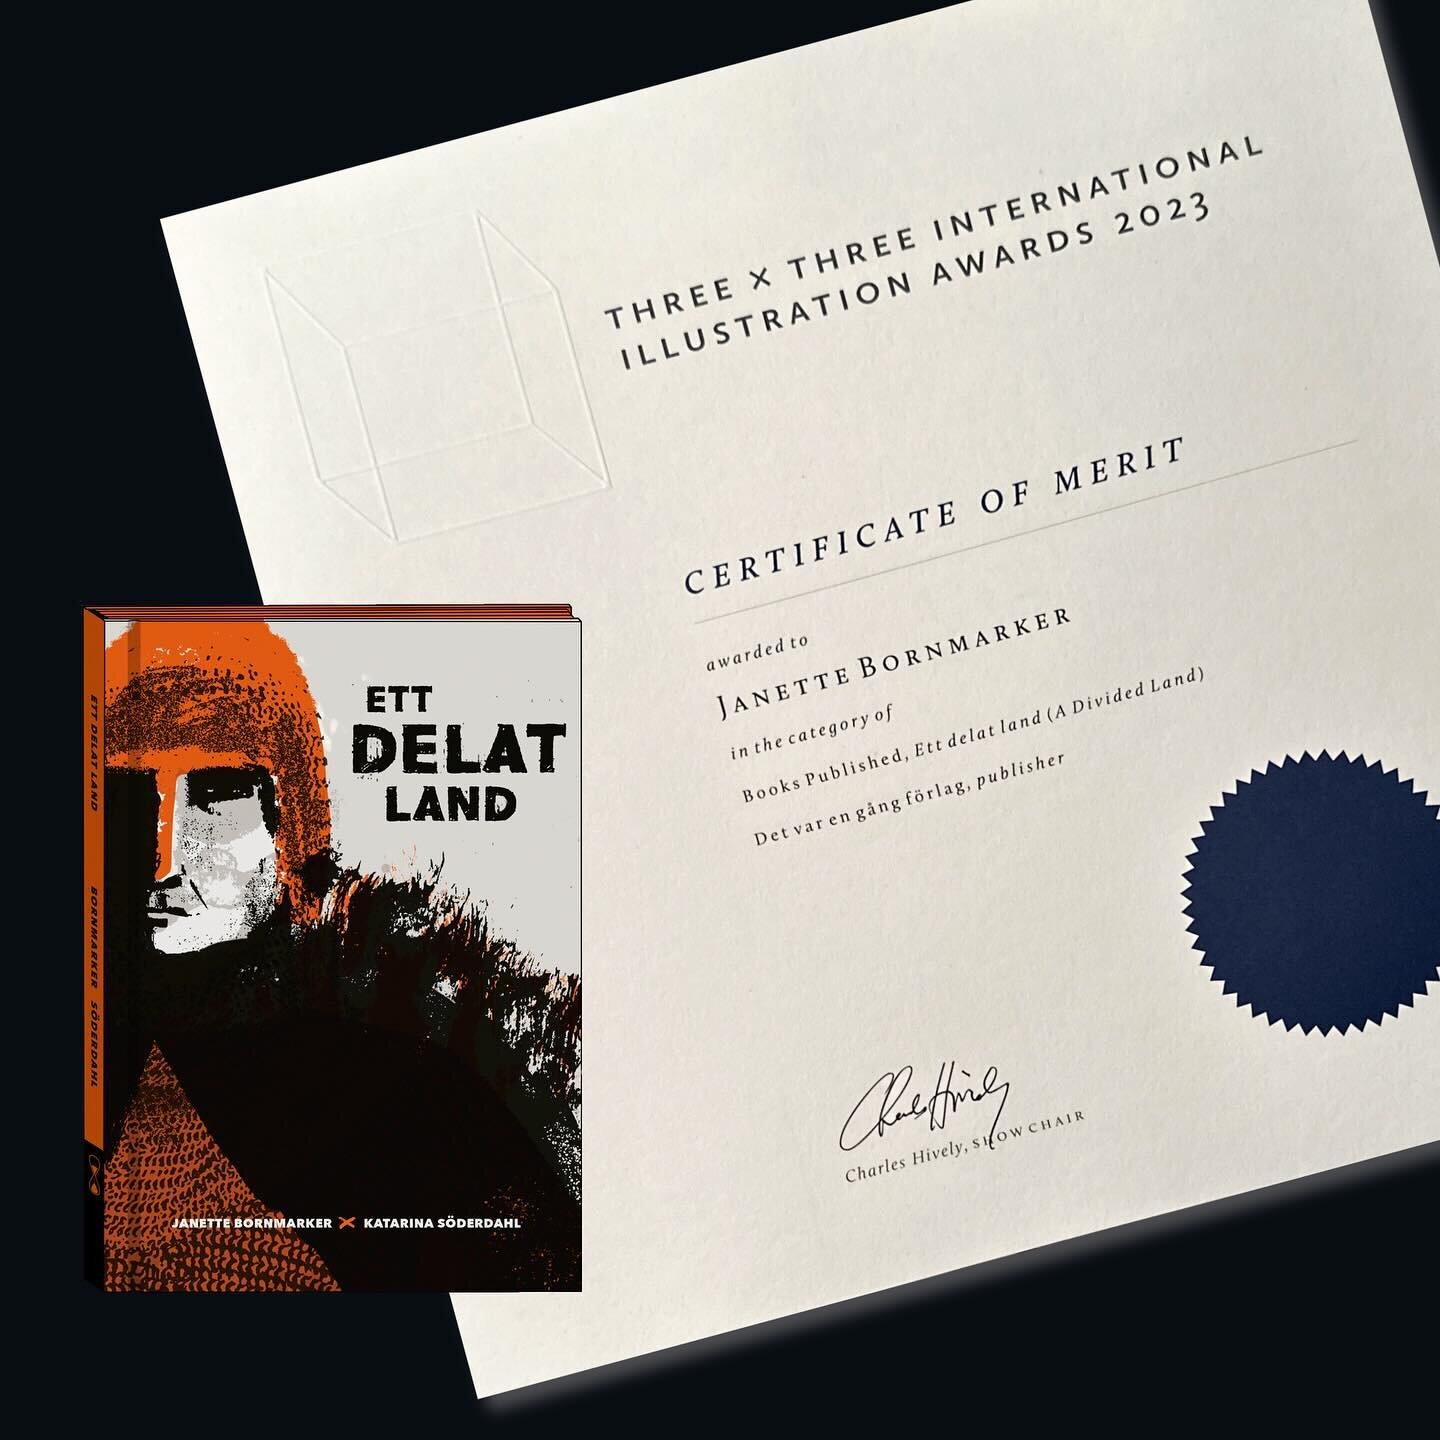 Not long ago my illustrations, from the book &ldquo;Ett delat land&rdquo; (eng. A divided land), was merited awarded in the 3x3 annual illustration show. 
Today a nice mail arrived... An actual diploma, it&rsquo;ll truly look good in my atelier. 

Th